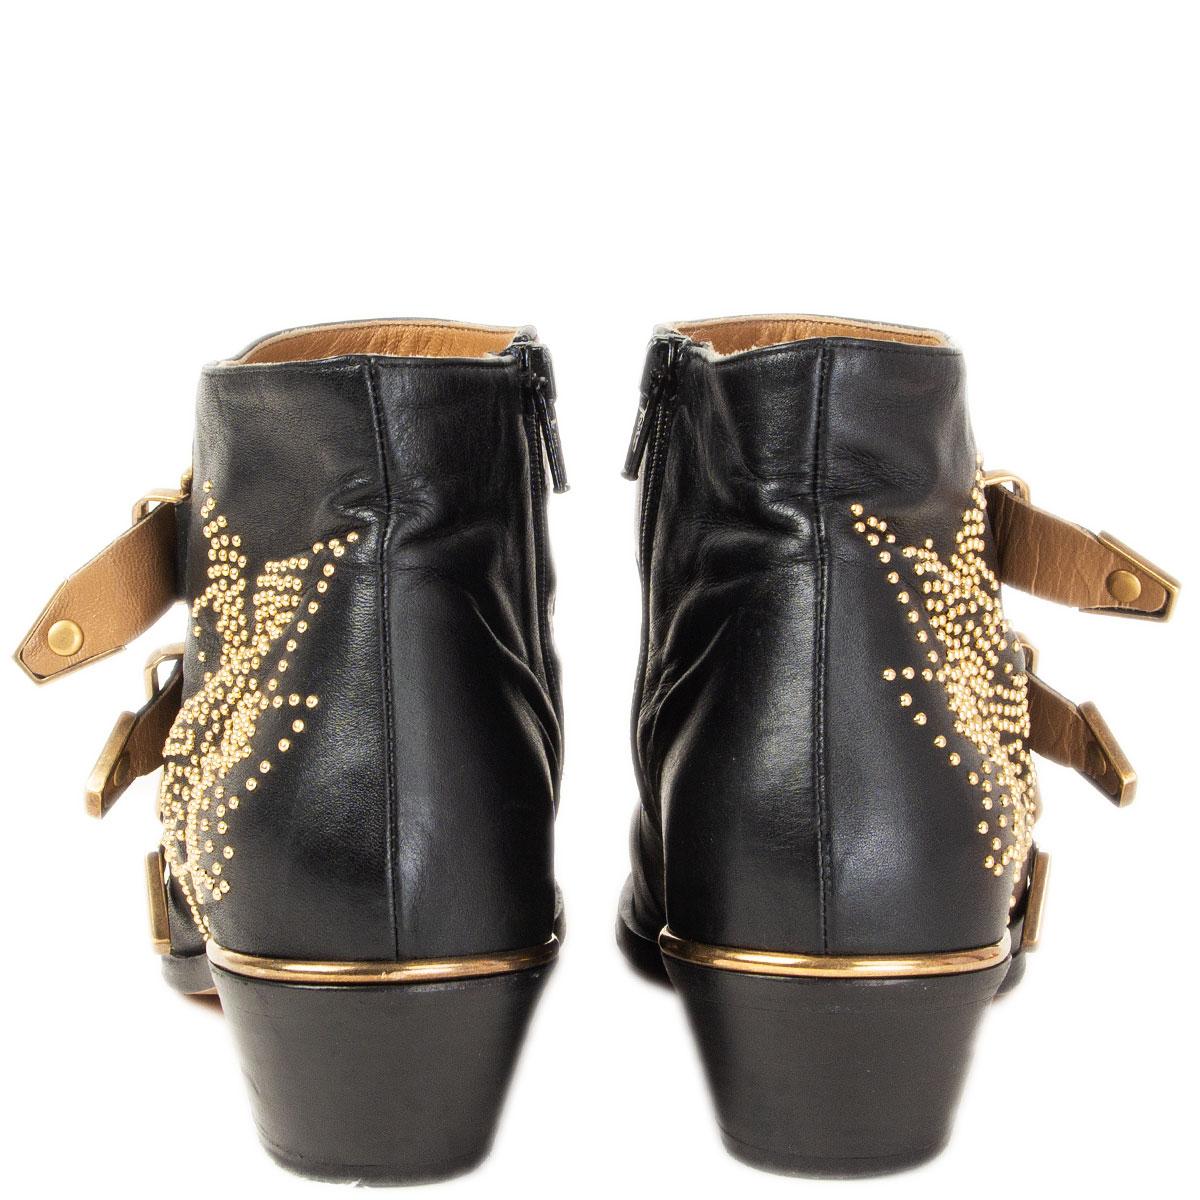 CHLOE black leather STUDDED SUSANNA Ankle Boots Shoes 37 For Sale 1